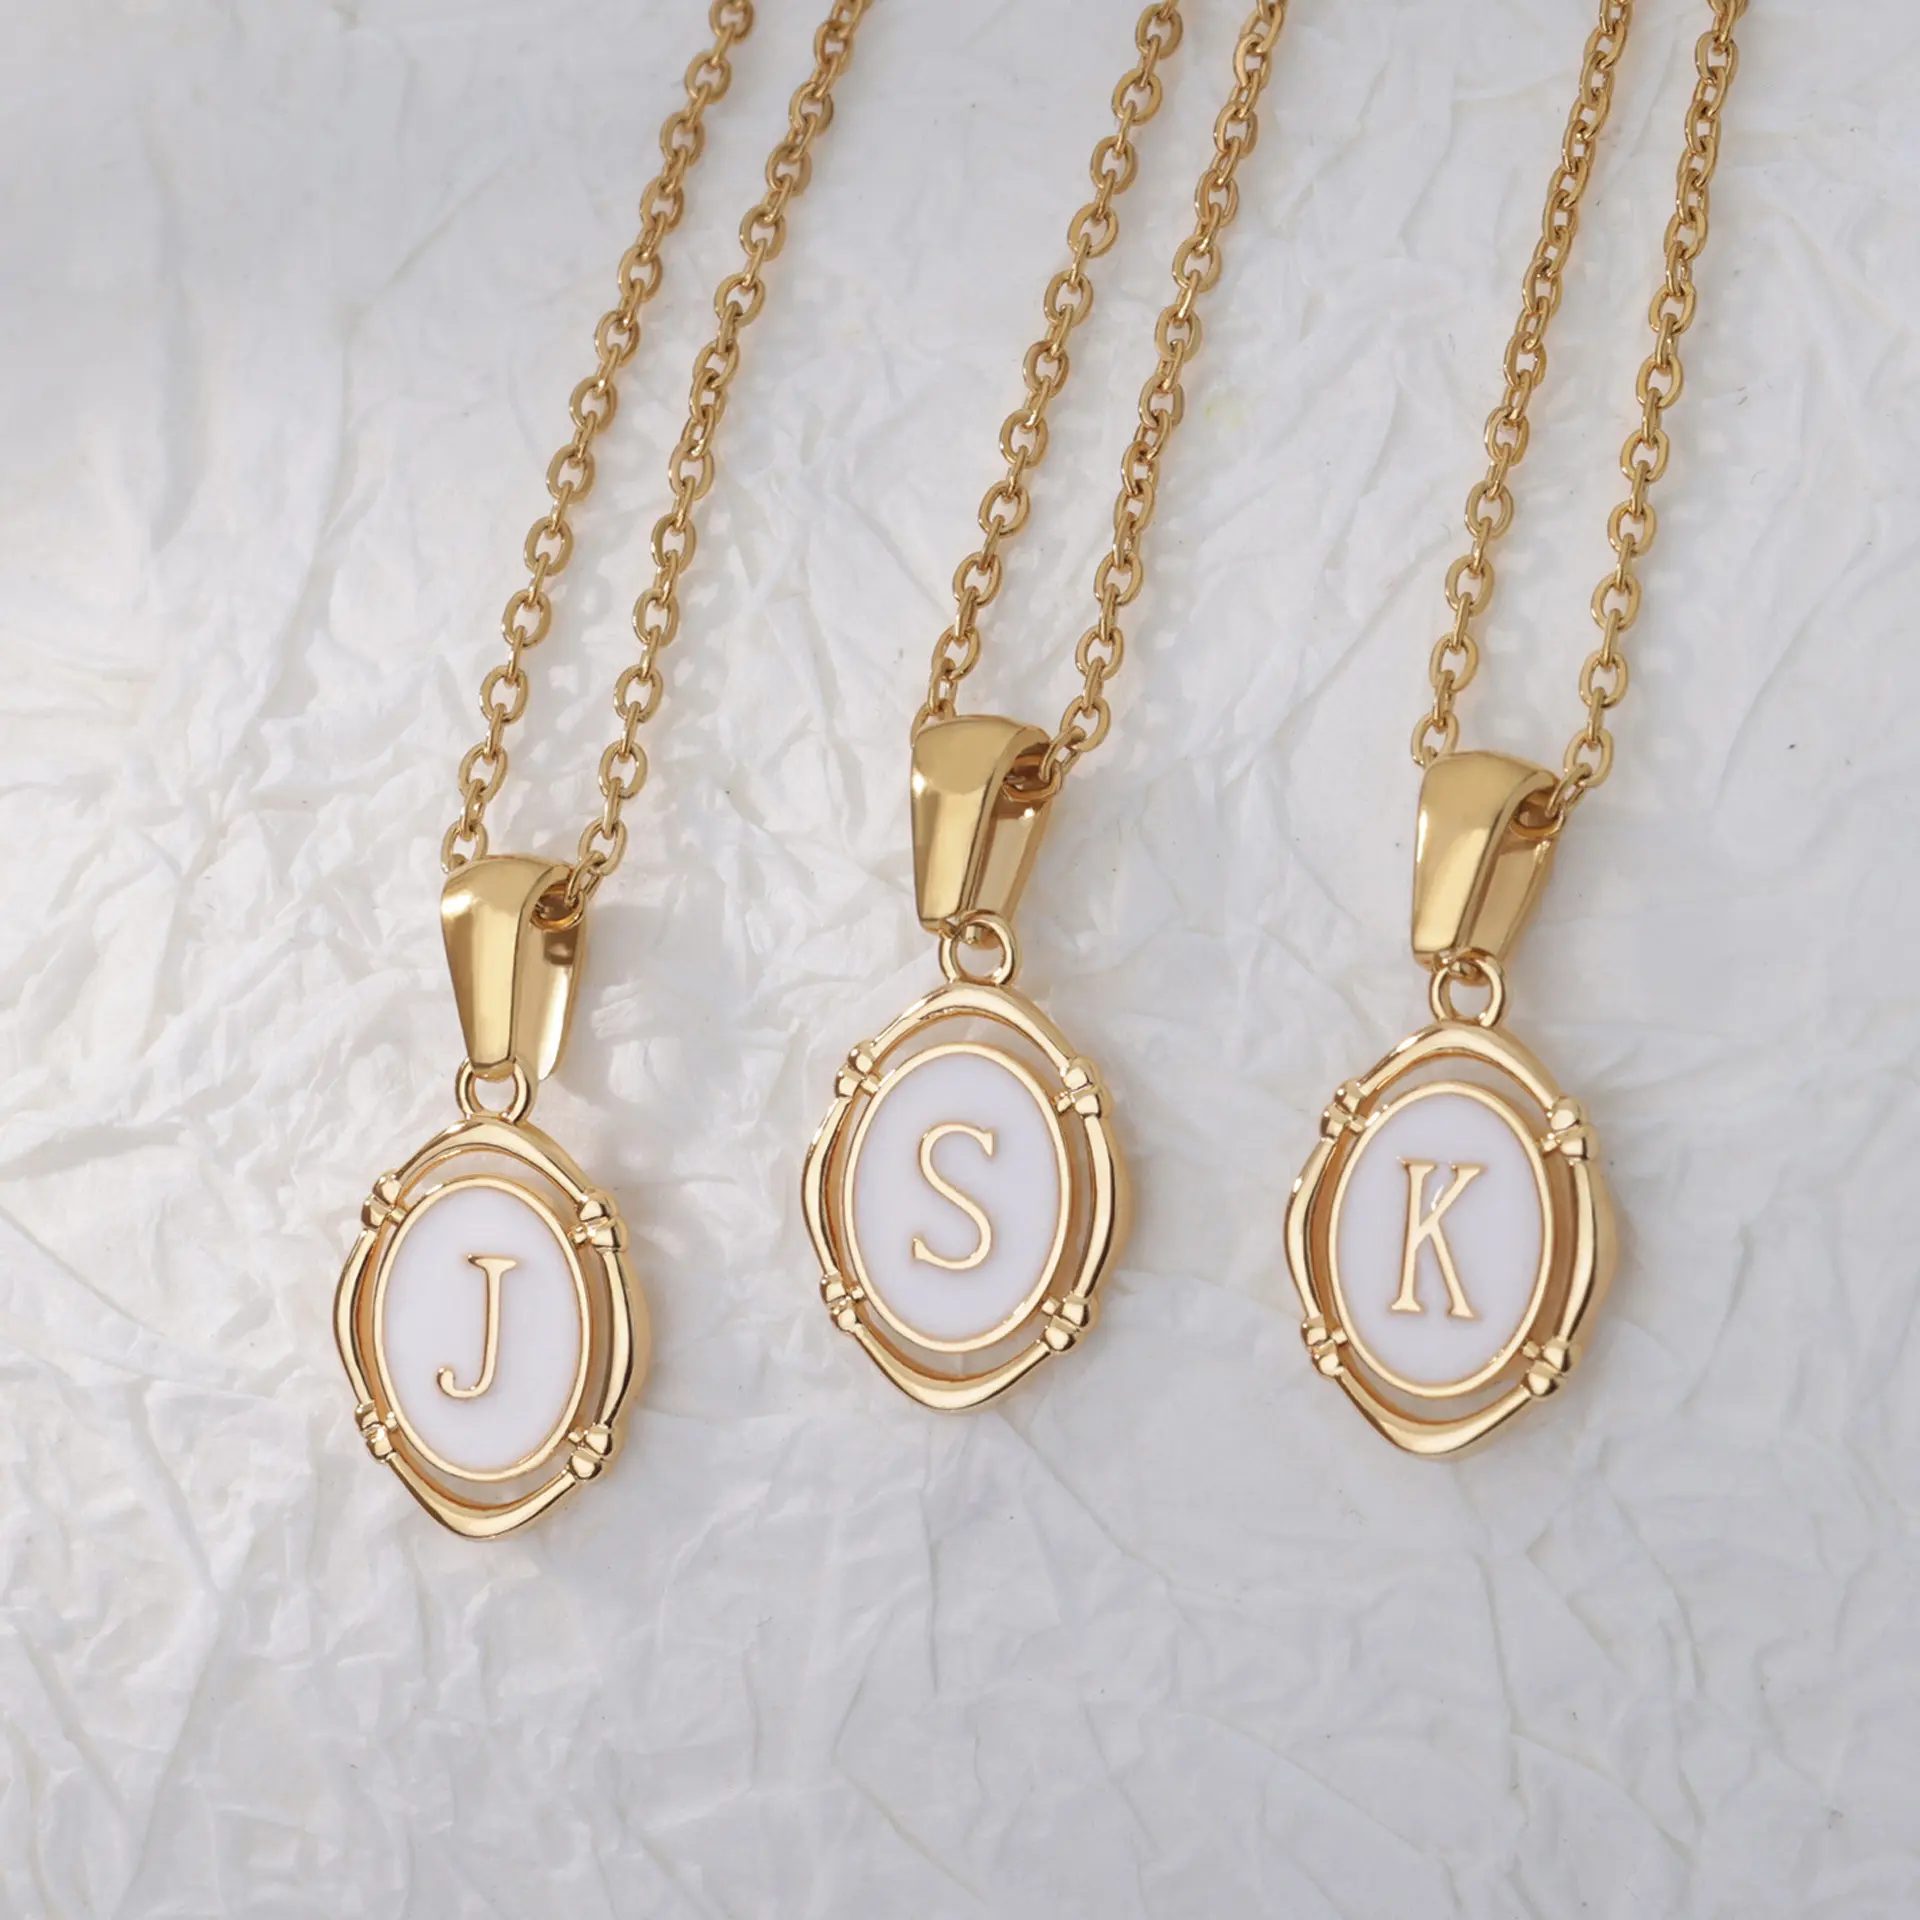 Delicate Stainless Steel DIY Chain Style Oval Vintage White Enamel A-Z 26 Letters Initial Pendant Necklaces for Women Jewelry